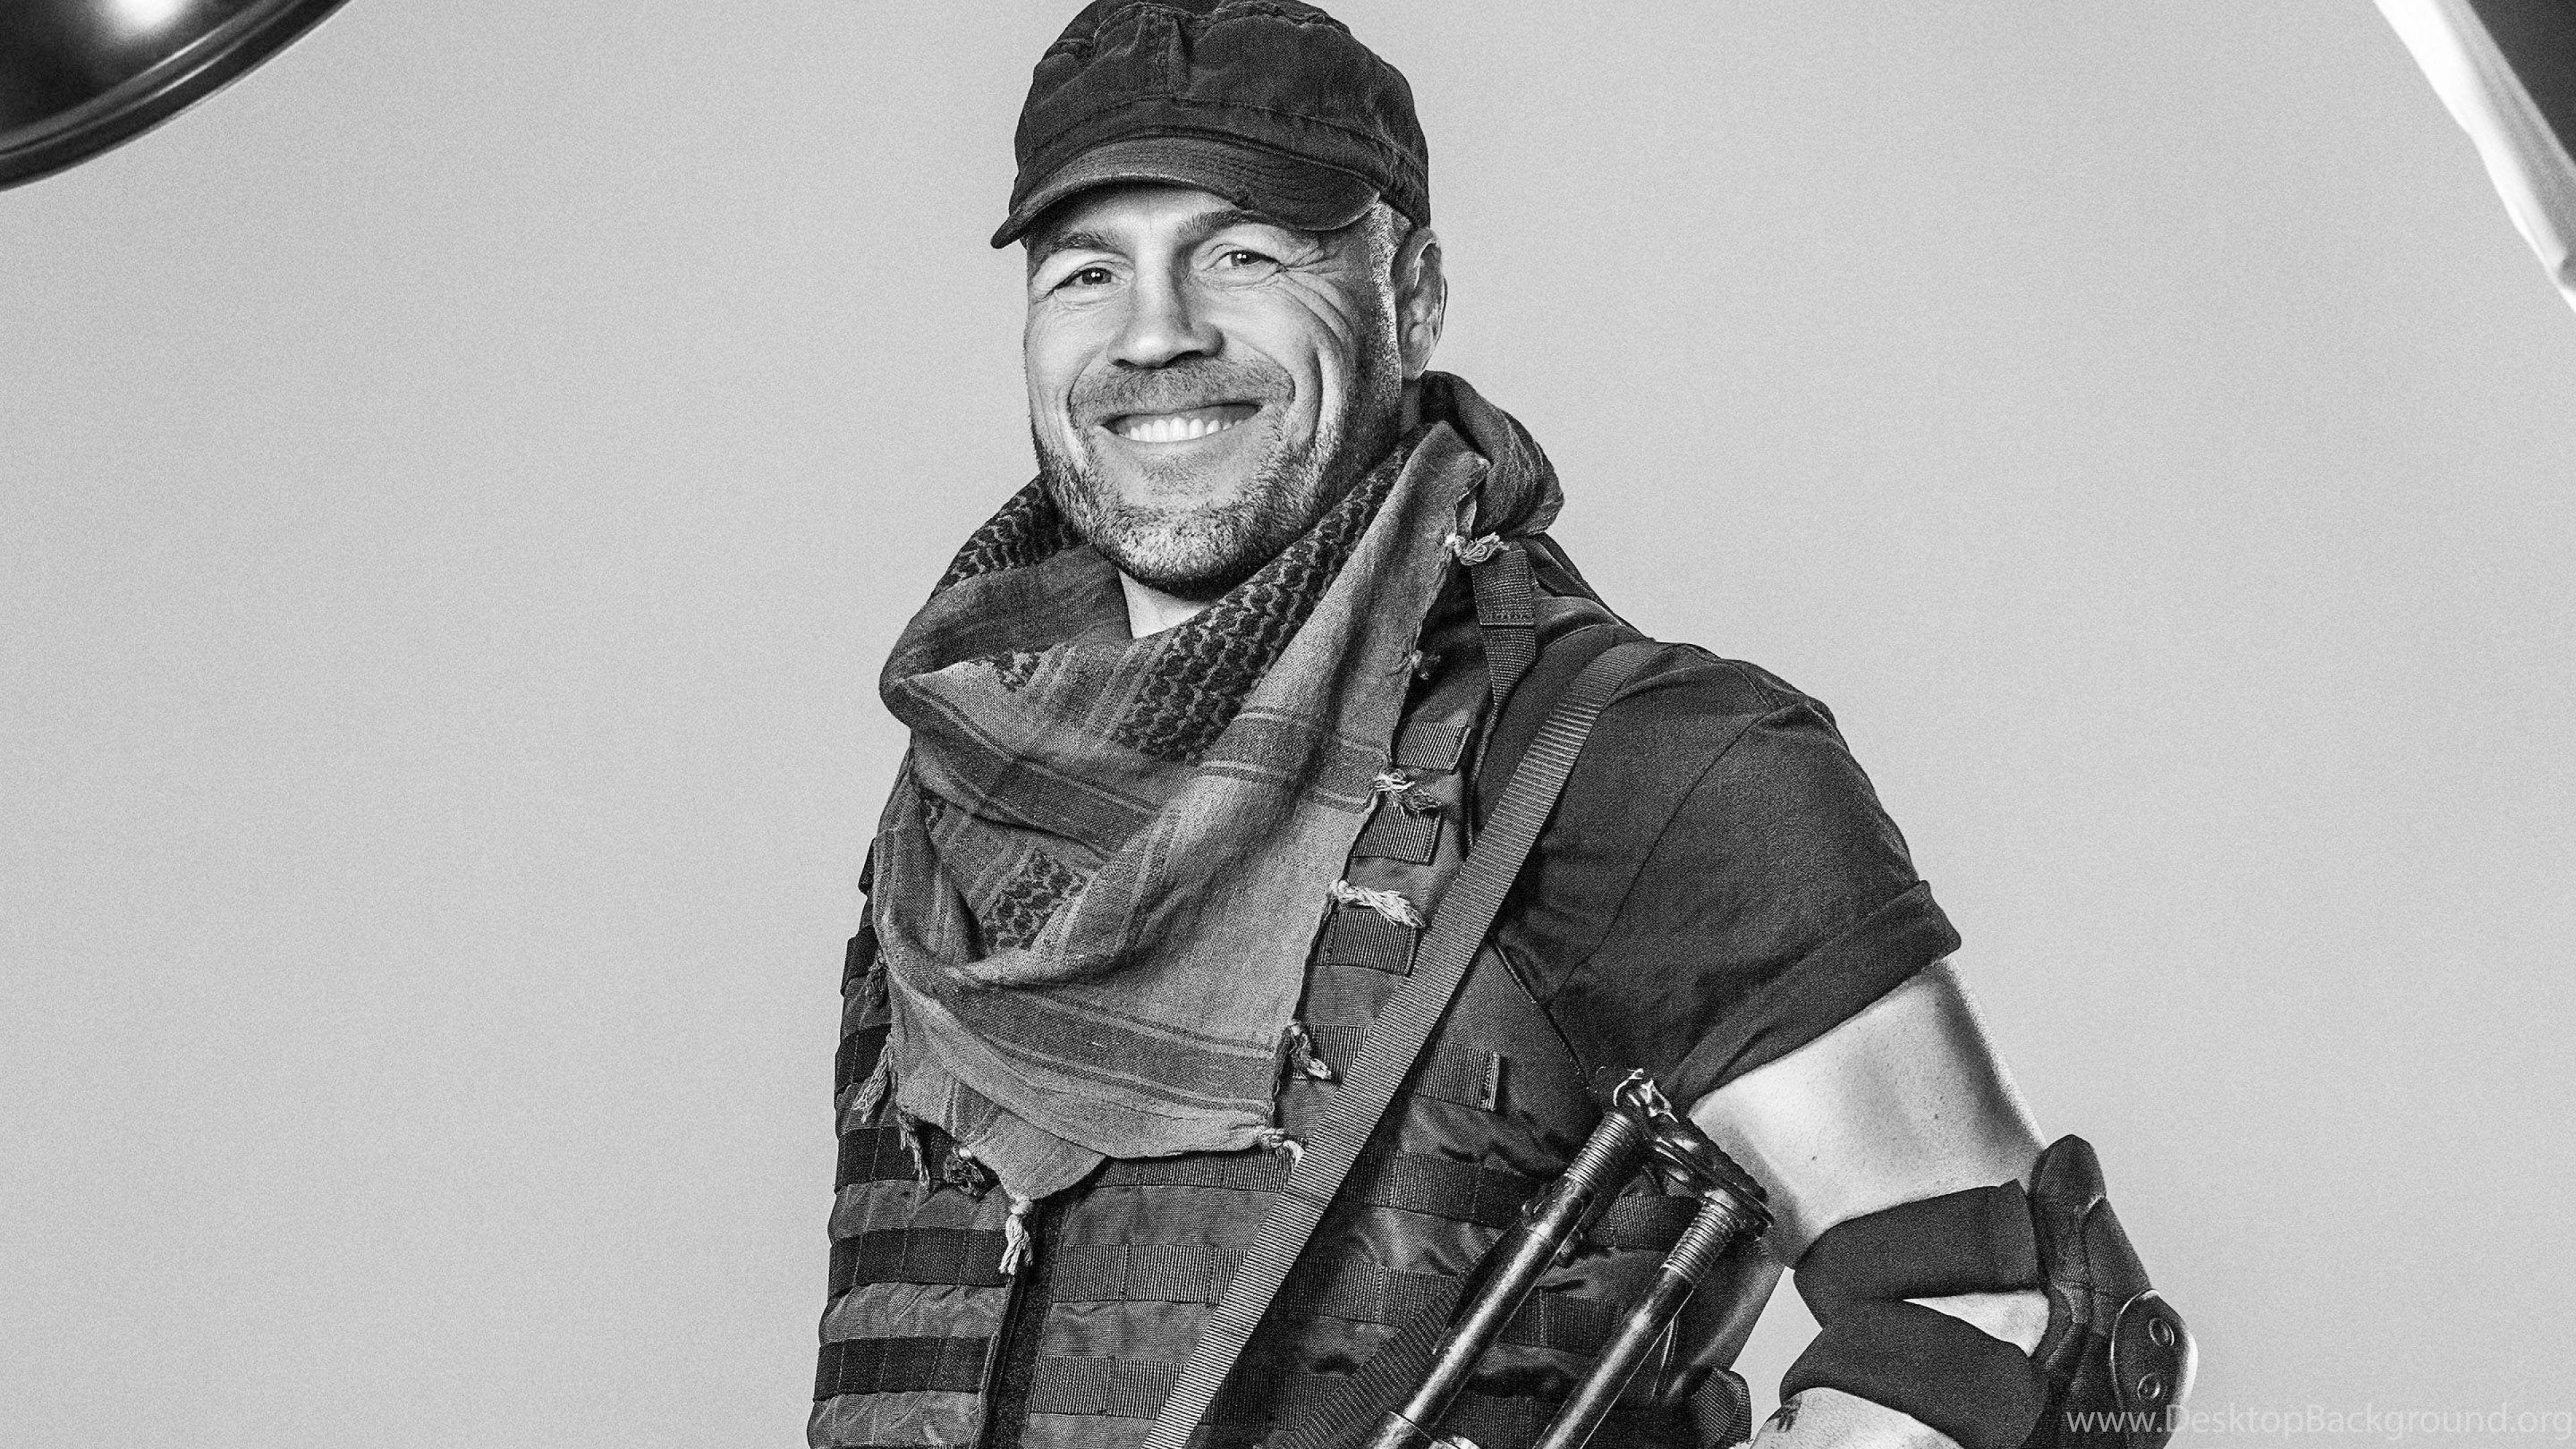 https://www.desktopbackground.org/download/o/2014/02/28/724317_expendables-randy-road-posing-randy-couture-for-the-expendables-3_3840x2160_h.jpg